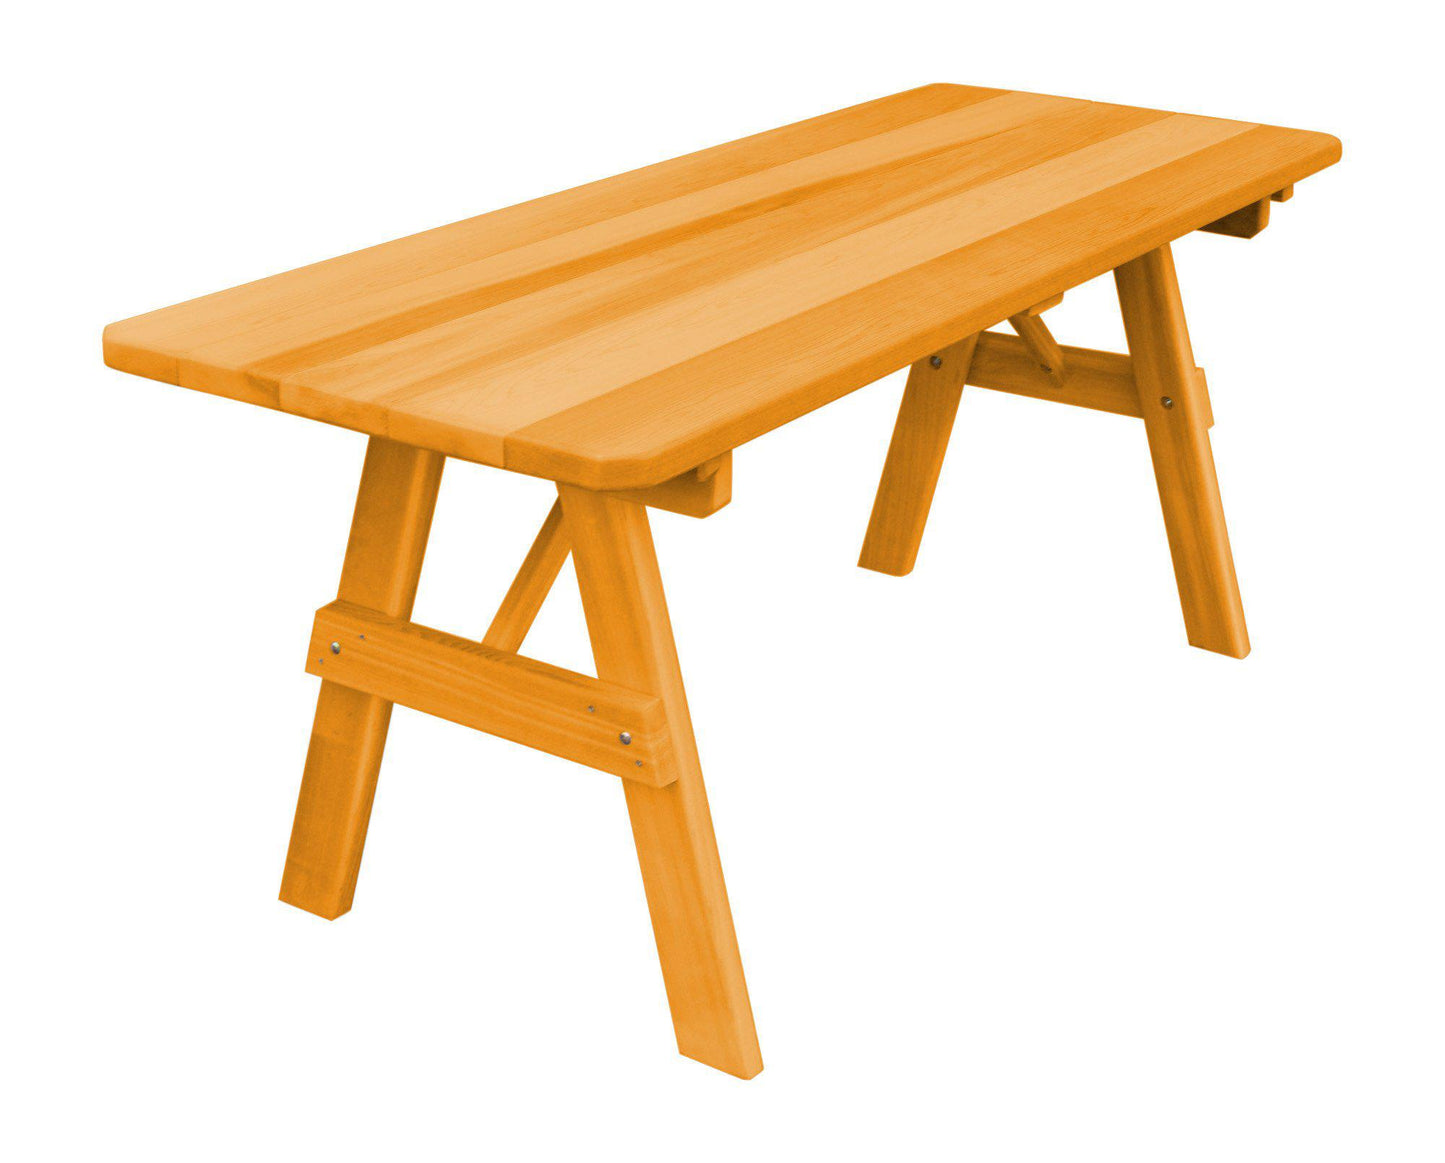 A&L FURNITURE CO.Western Red Cedar 44" Traditional Table Only - Specify for FREE 2" Umbrella Hole - LEAD TIME TO SHIP 2 WEEKS